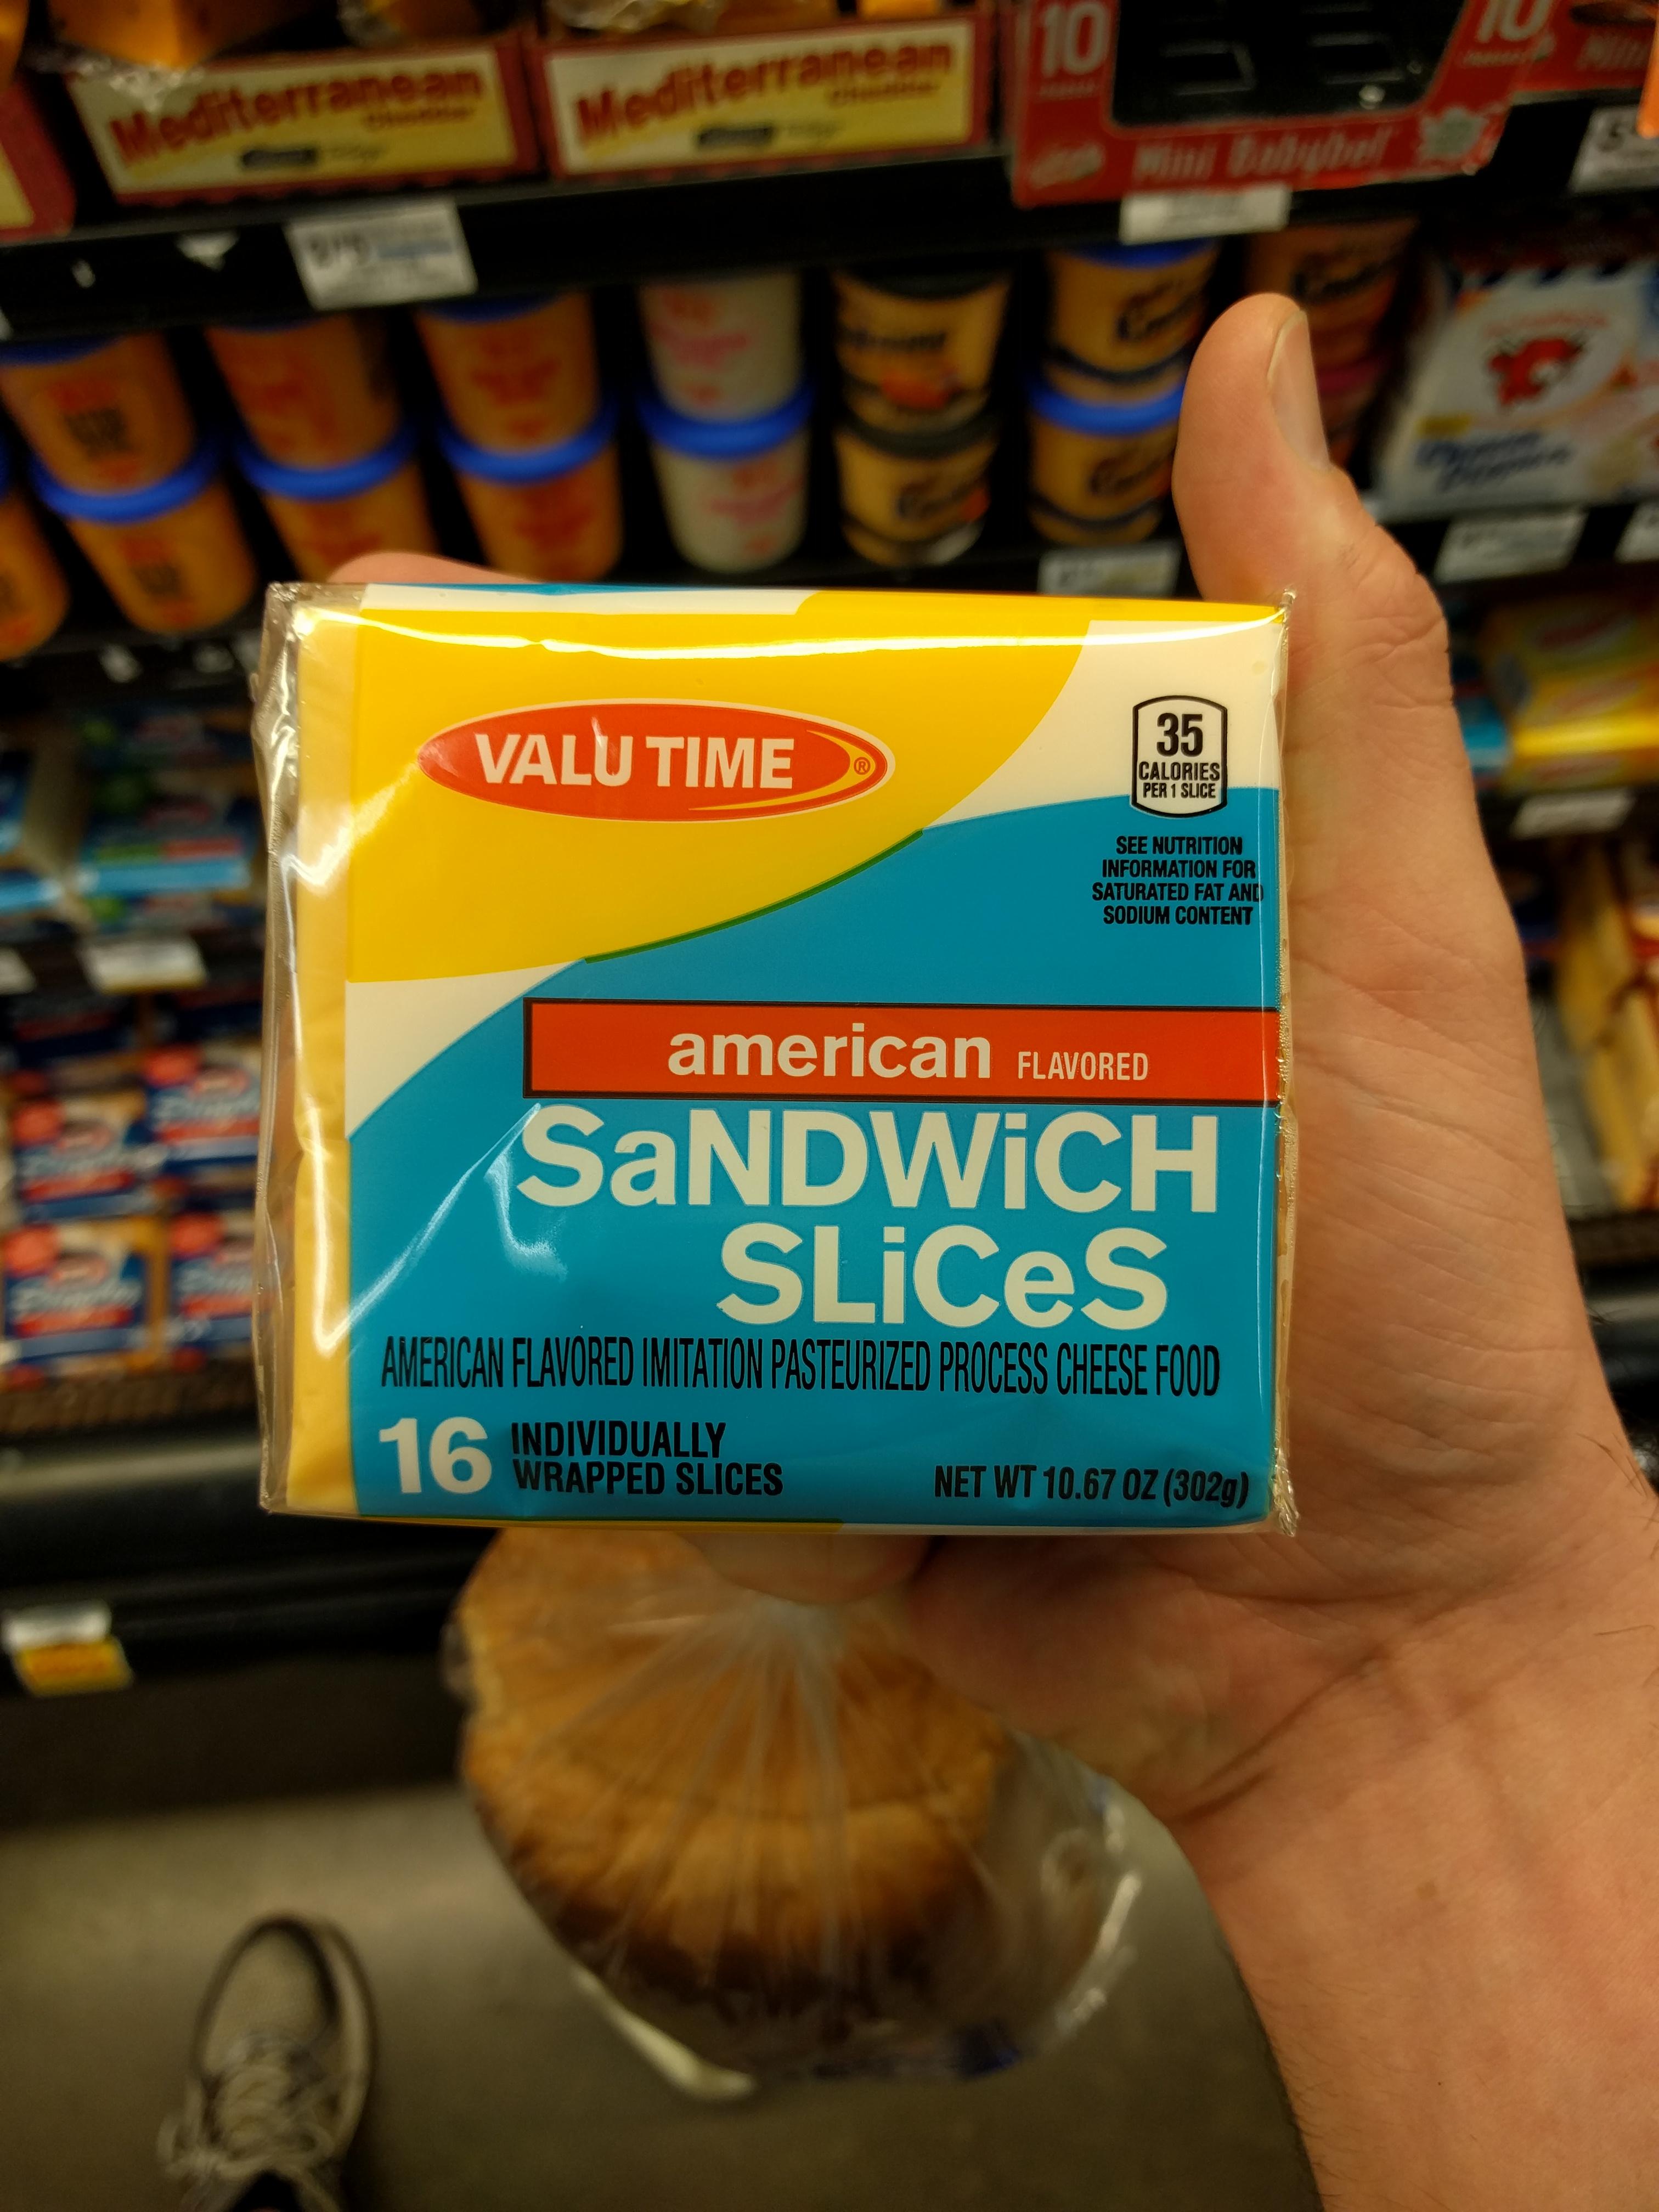 American Flavored Imitation Pasteurized Process Cheese Food…Hopefull You Are Not Putting This Shit In Your Body